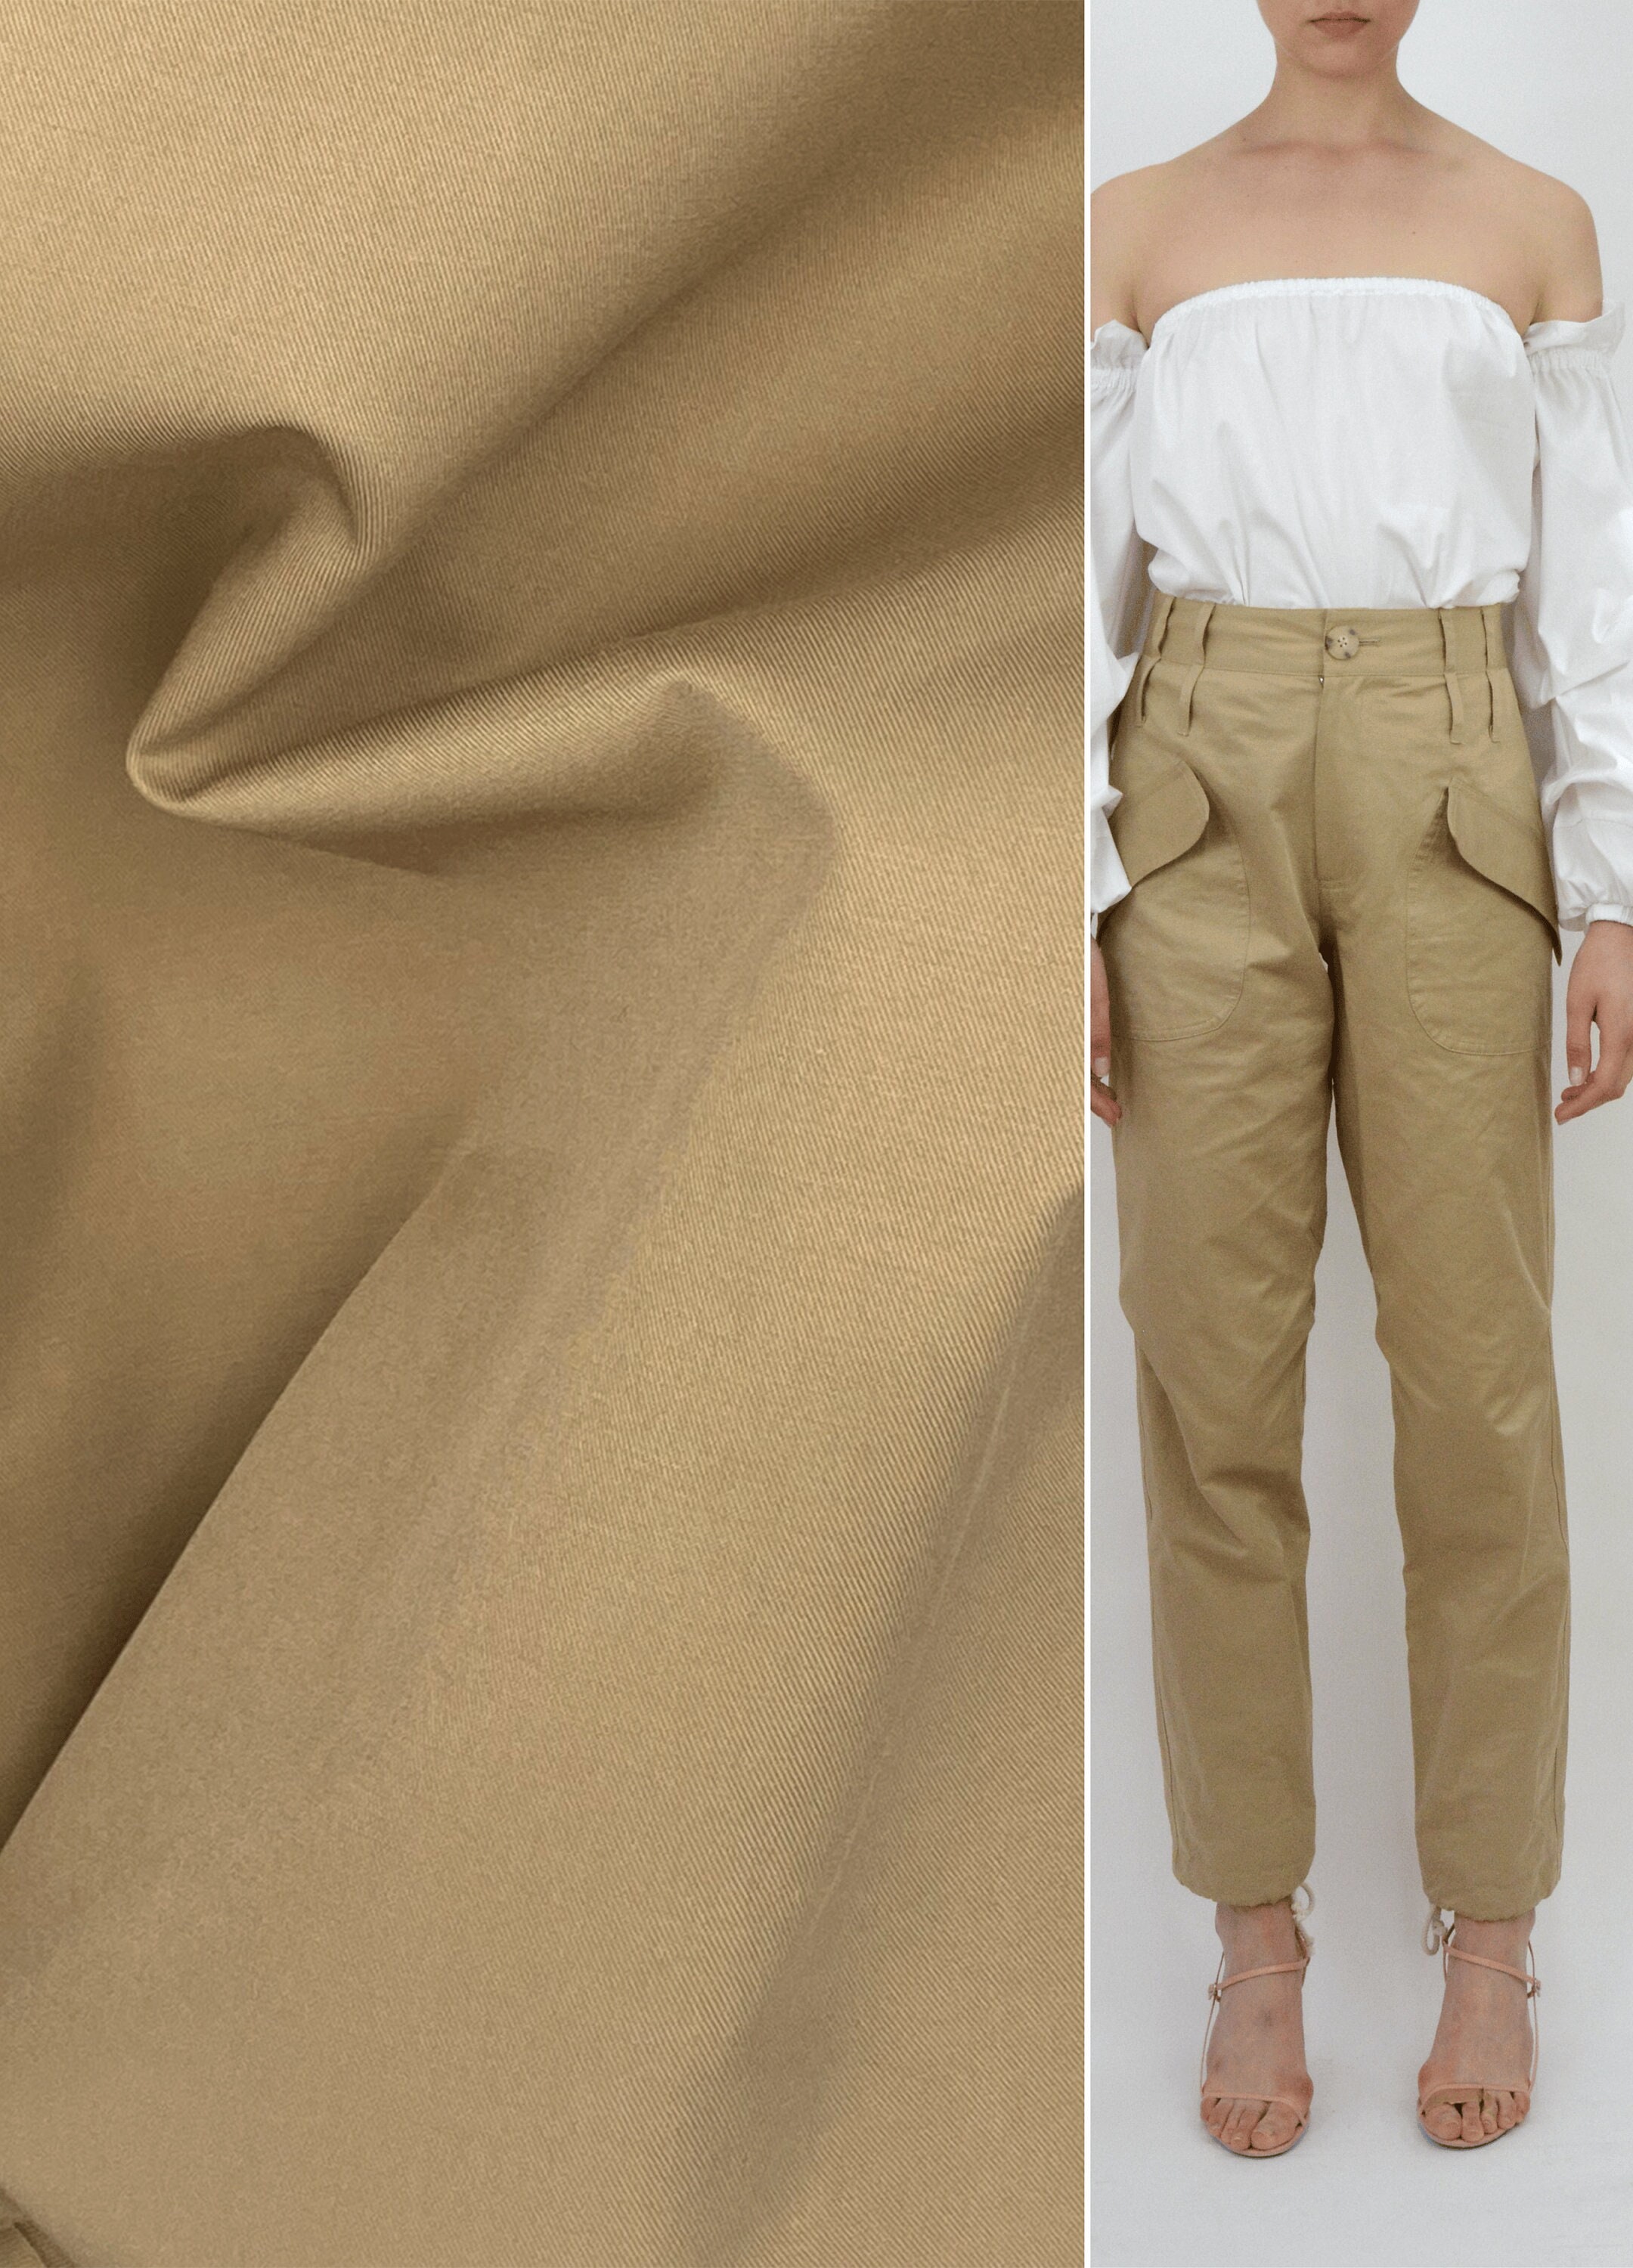 Khaki Tan Stretch Fabric, Solid Cotton Polyester Twill Spandex, Italian  Fabric, Woven Broadcloth for Sewing Blazers Pants Dresses Tops 